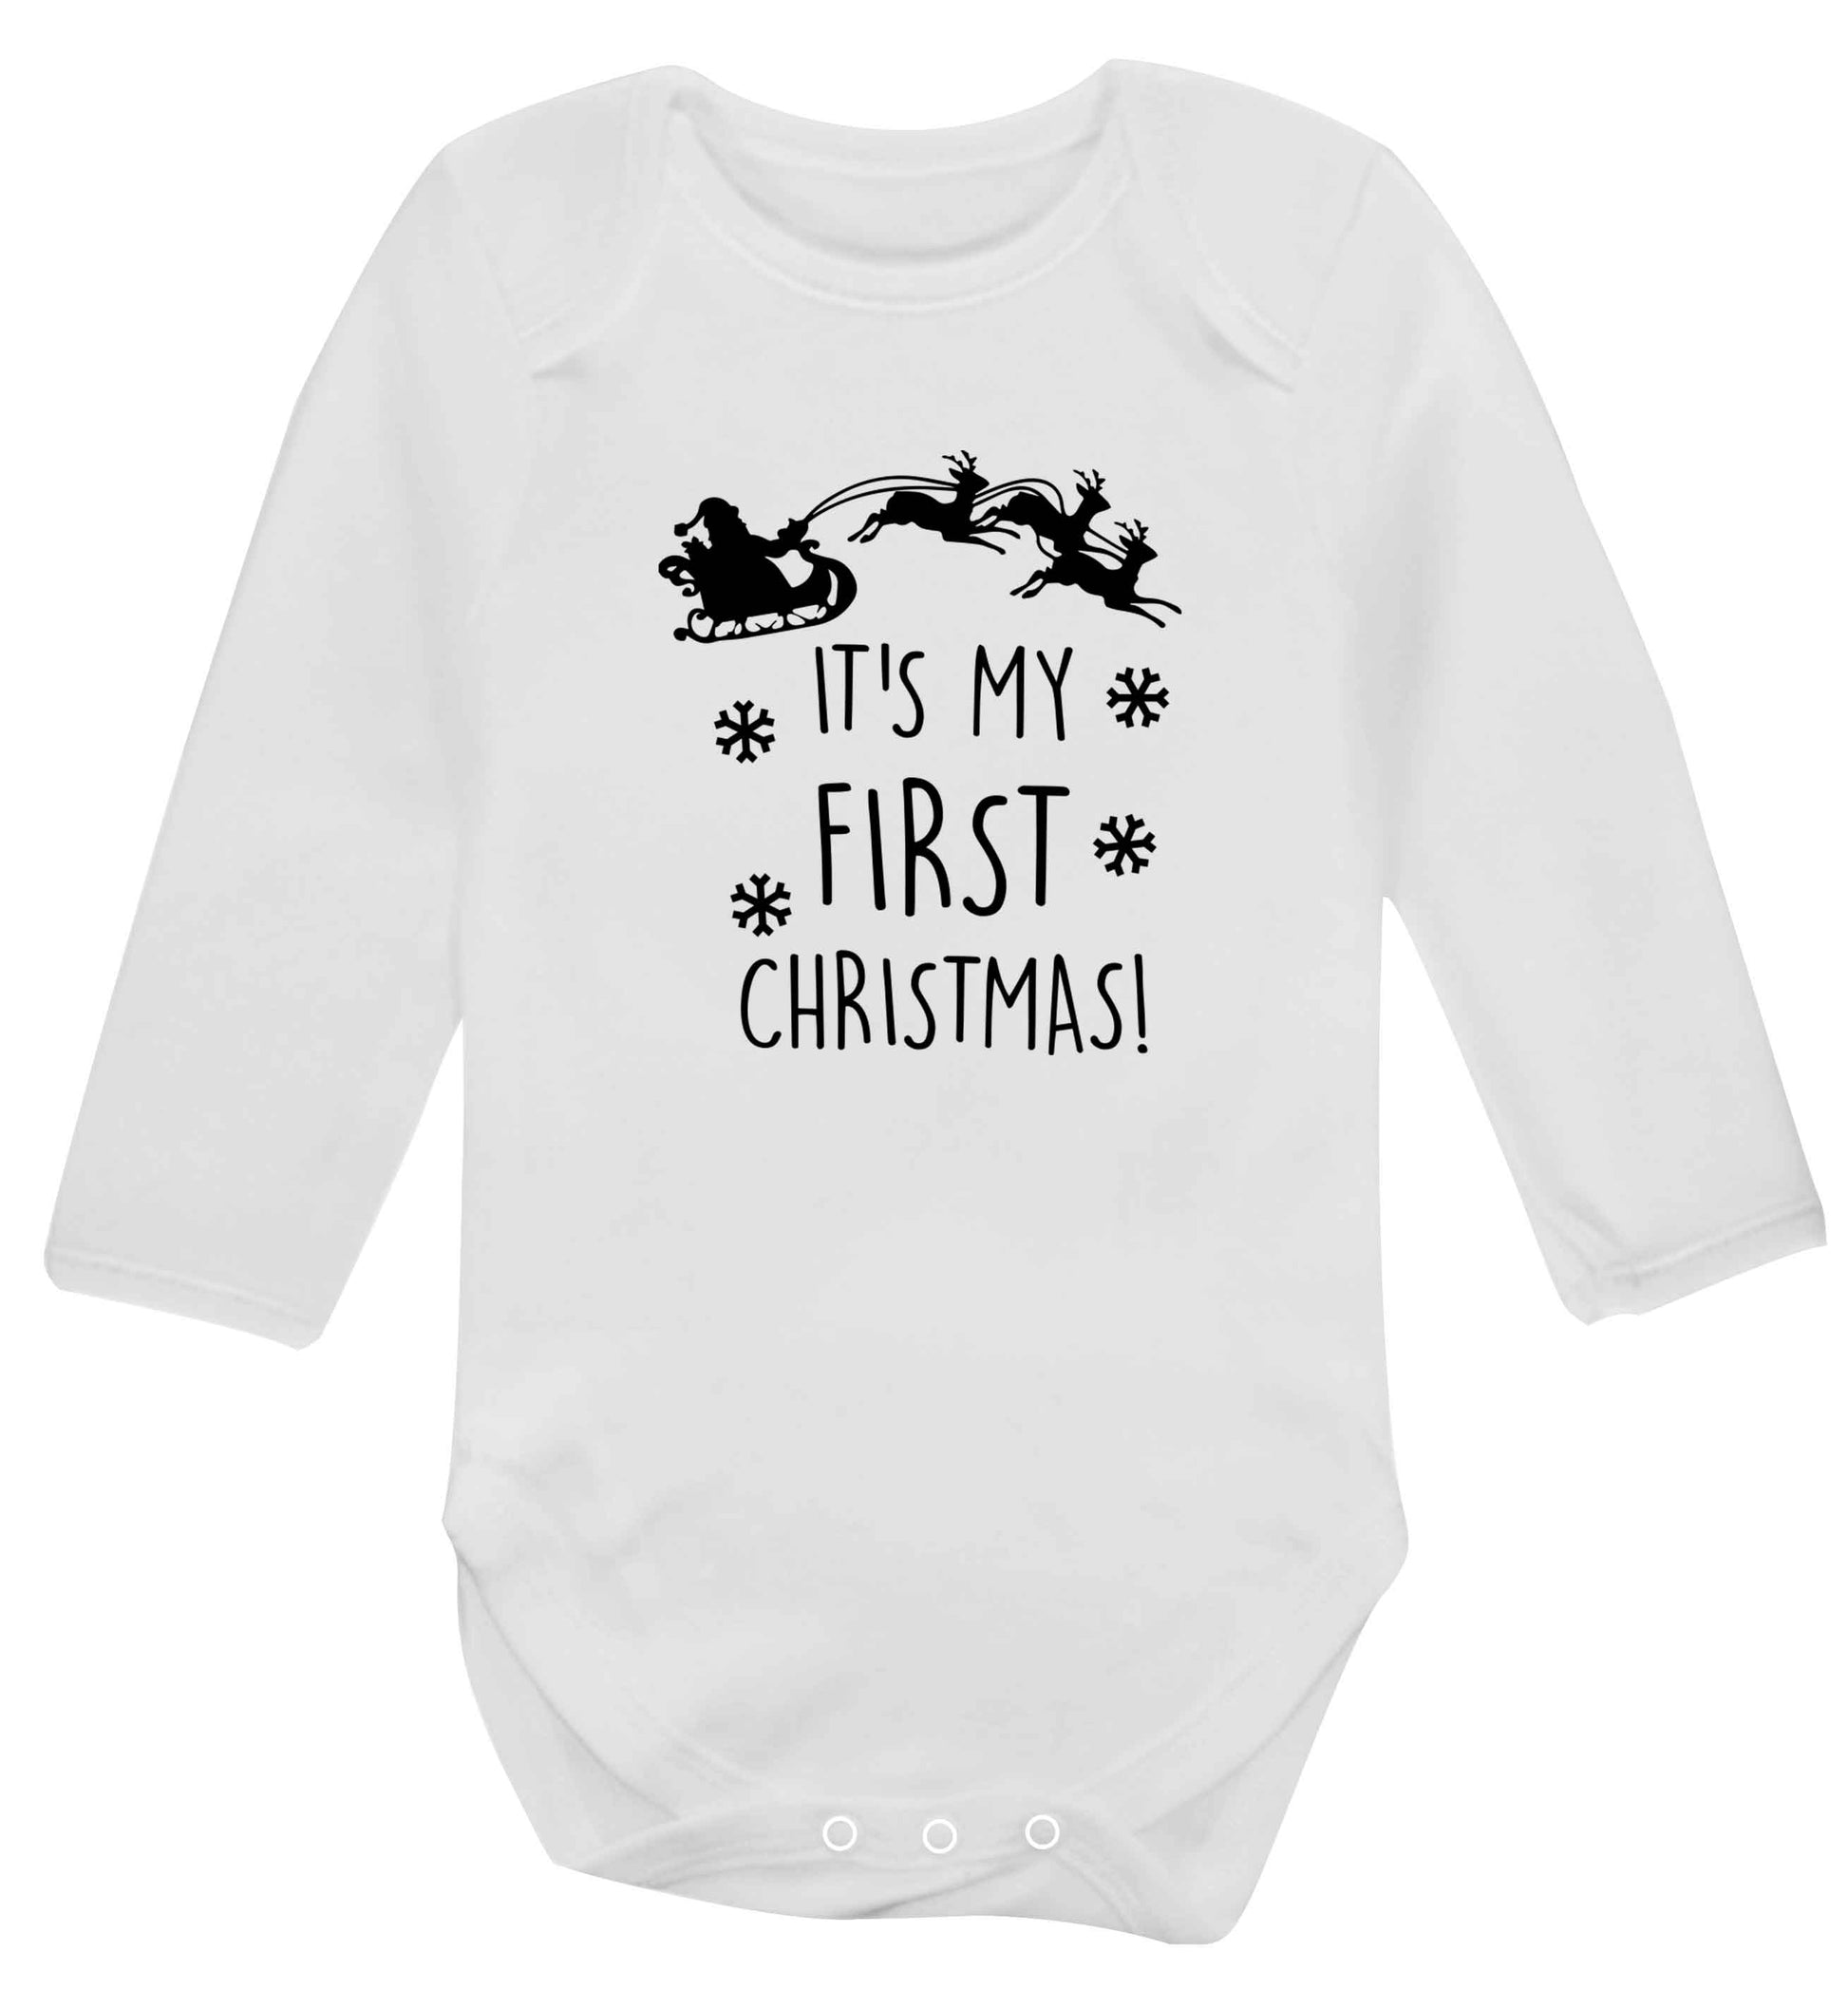 It's my first Christmas - Santa sleigh text baby vest long sleeved white 6-12 months